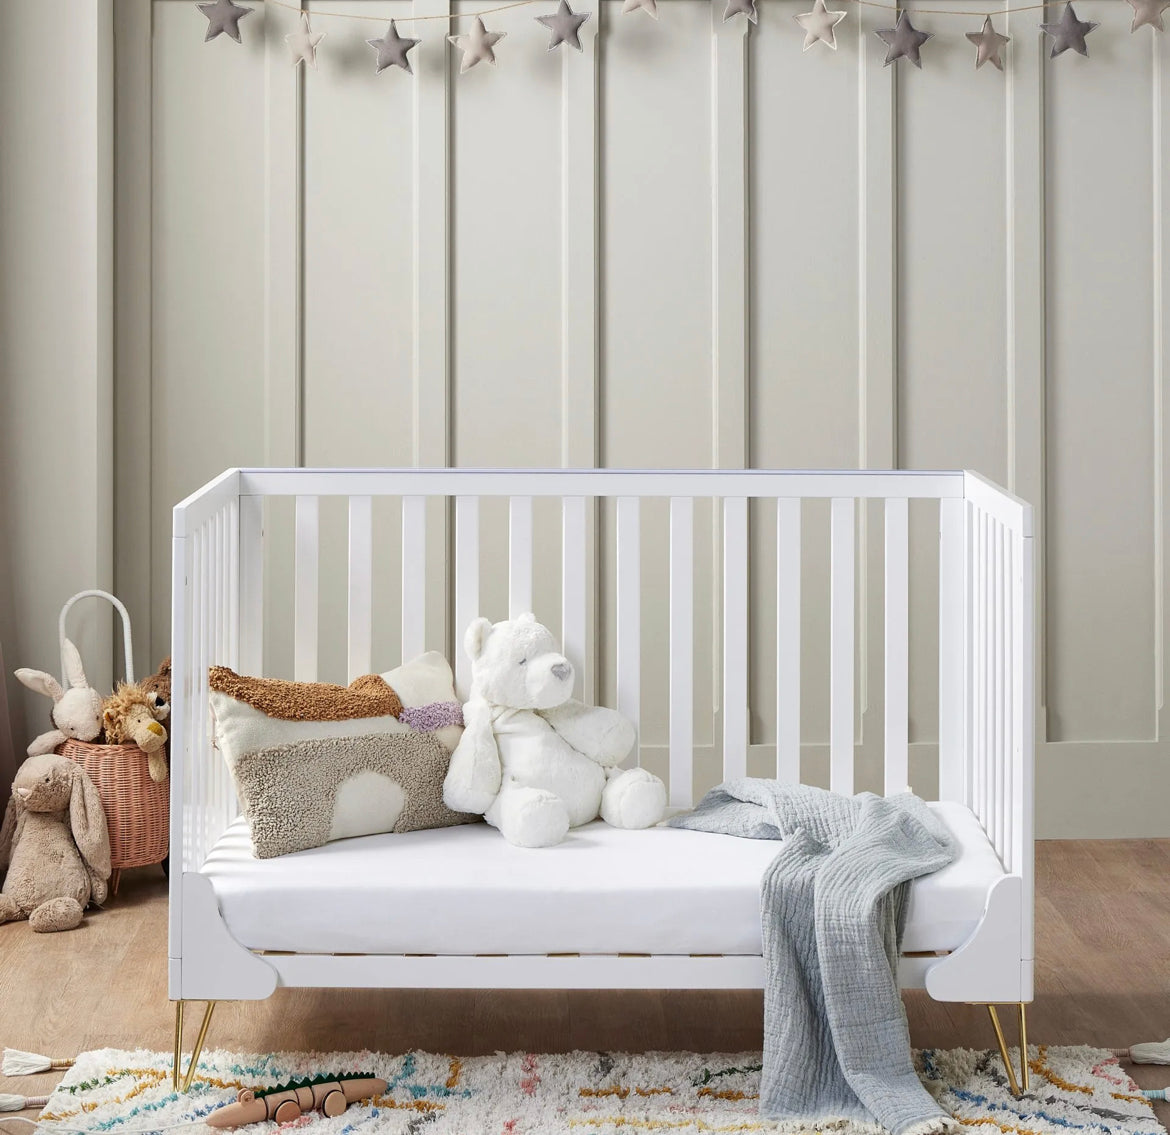 Babymore Kimi Cot Bed – White SALE